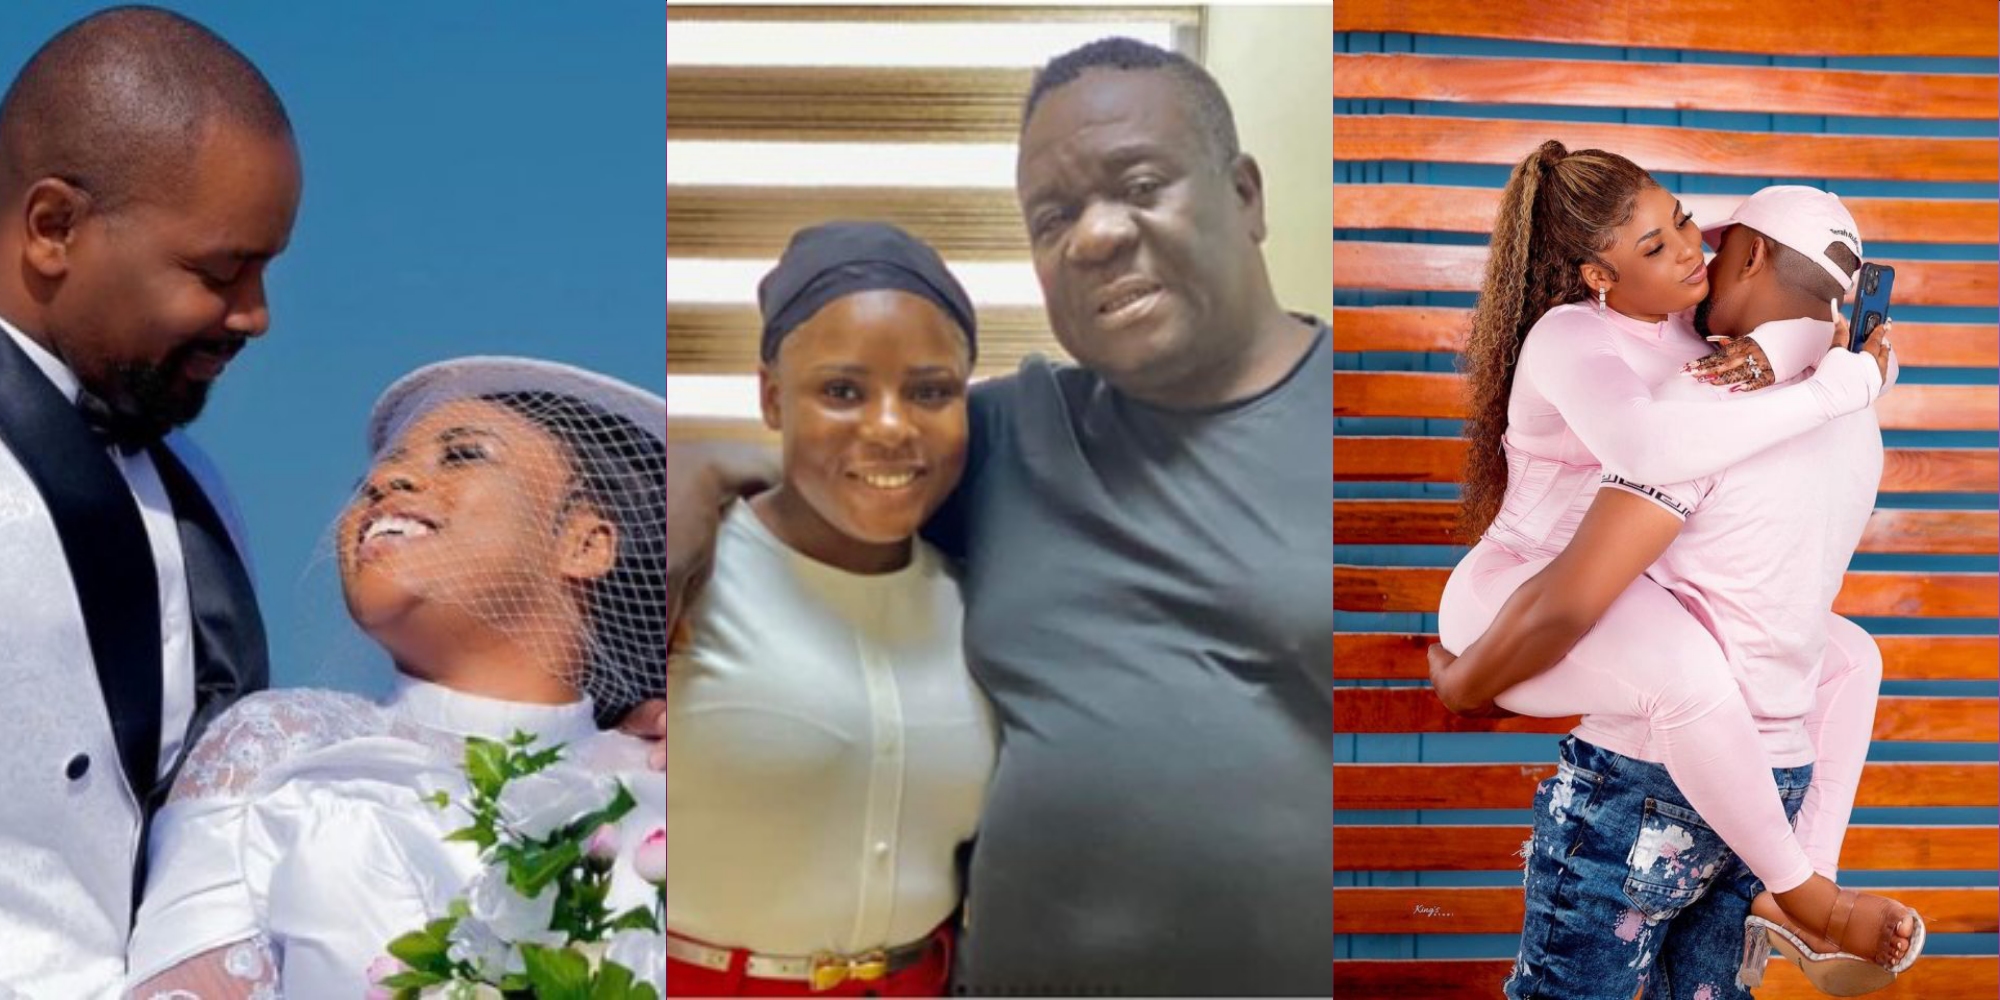 Mr. Ibu's Daughter Calls Off 9-Month-Old Marriage